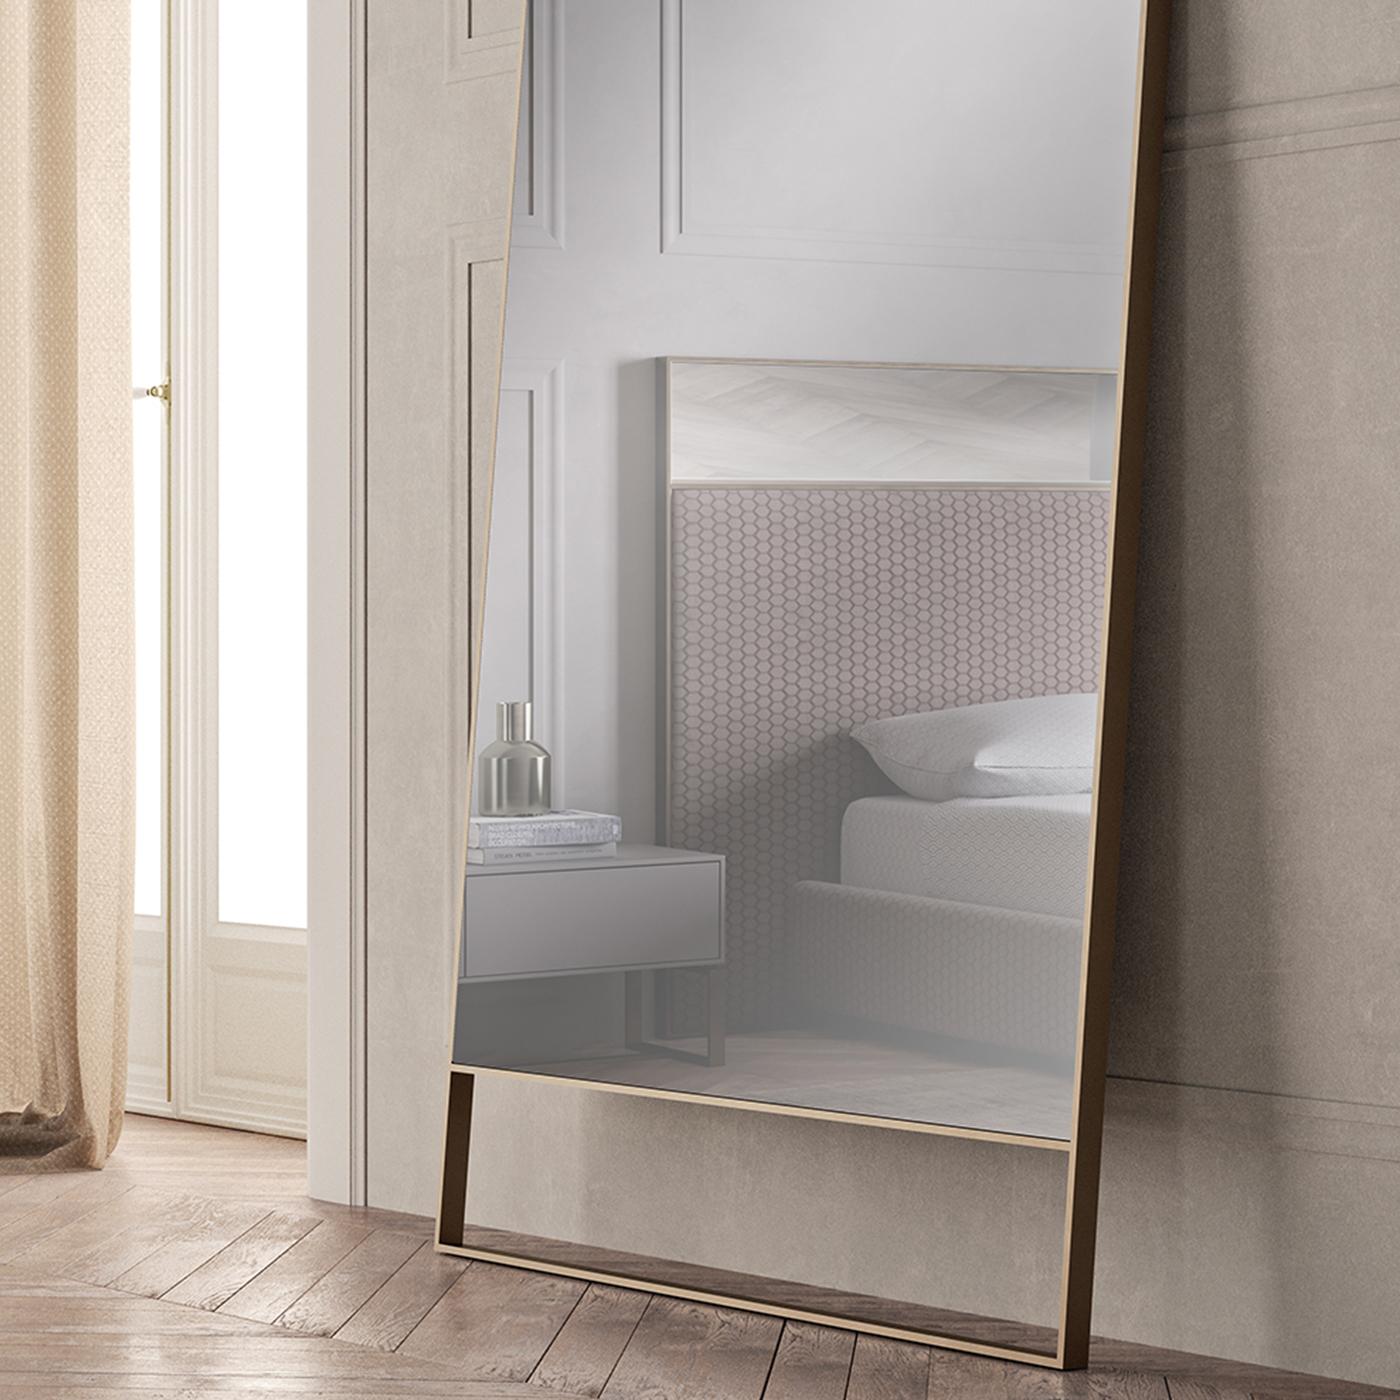 Smart solution for opening up a space, this elegant mirror will shine in modern residential and professional decors. The streamlined frame in satin-finished, lacquered stainless steel with components in poplar and birch plywood provides a rich,